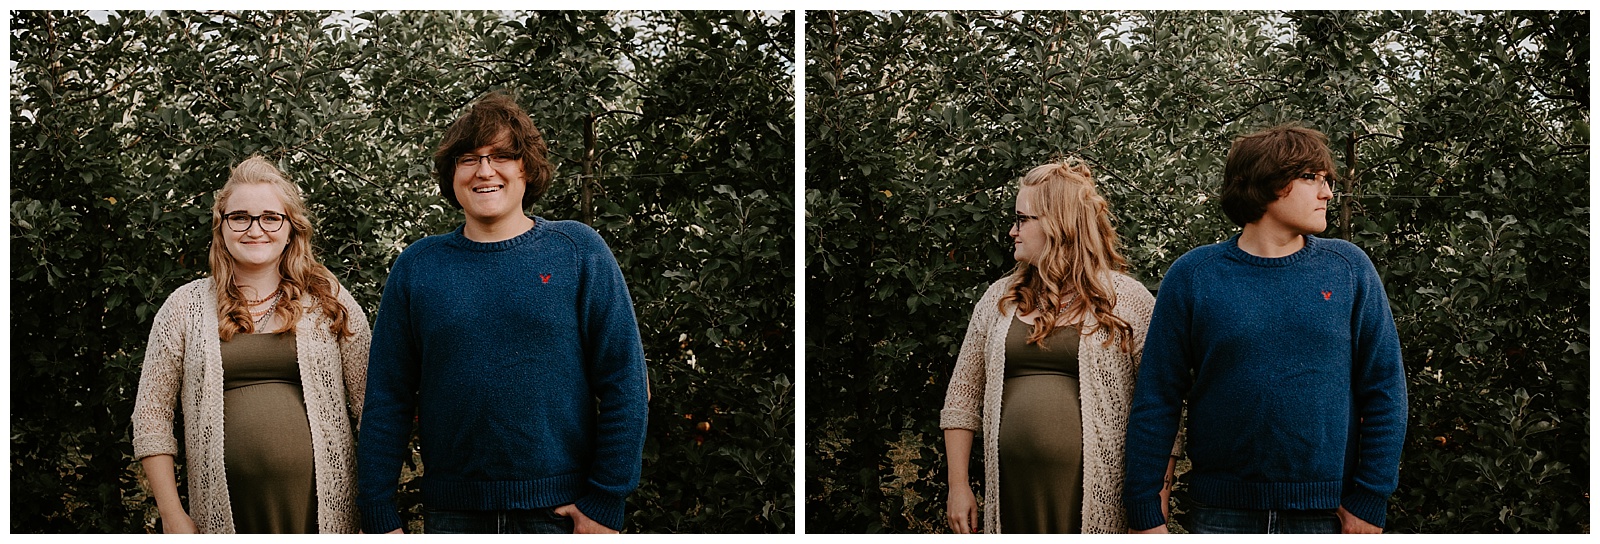 Maternity Session at Robinette's in Grand Rapids